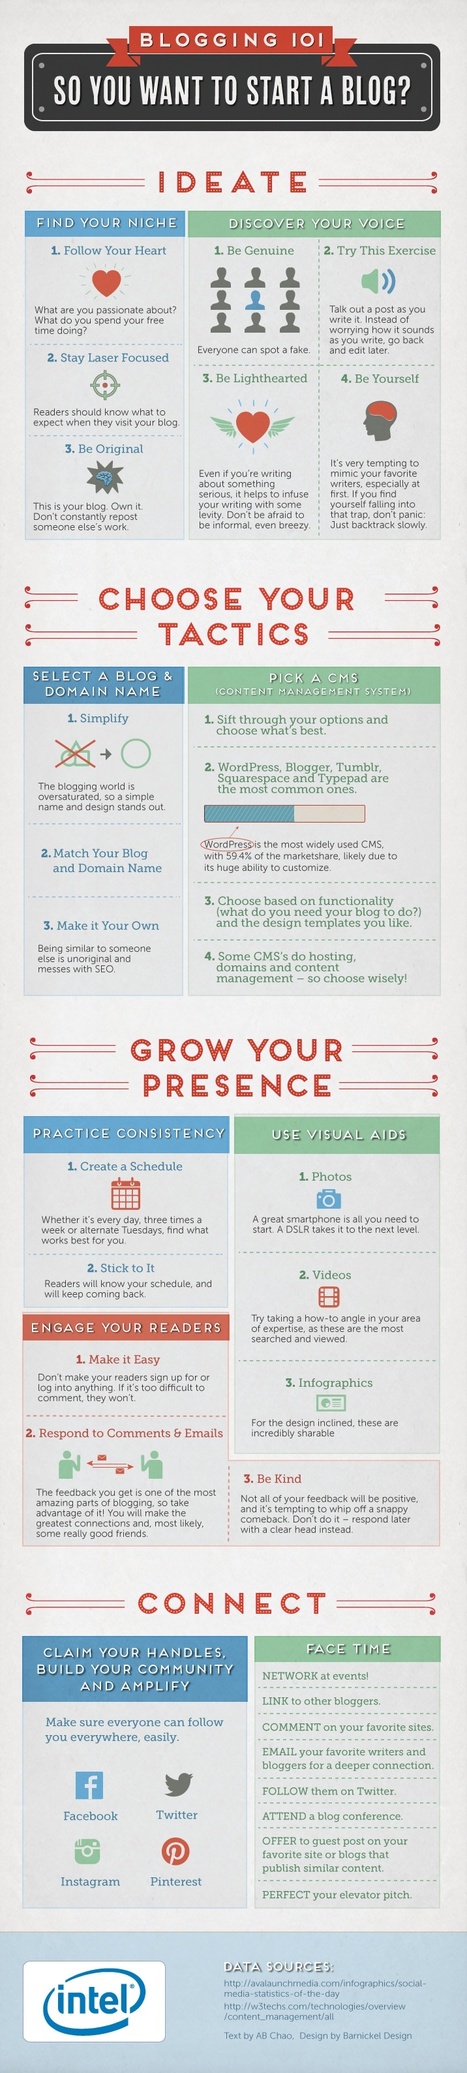 So You Want To Start A Blog? (Infographic) | KB...Konnected's  Kaleidoscope of  Wonderful Websites! | Scoop.it